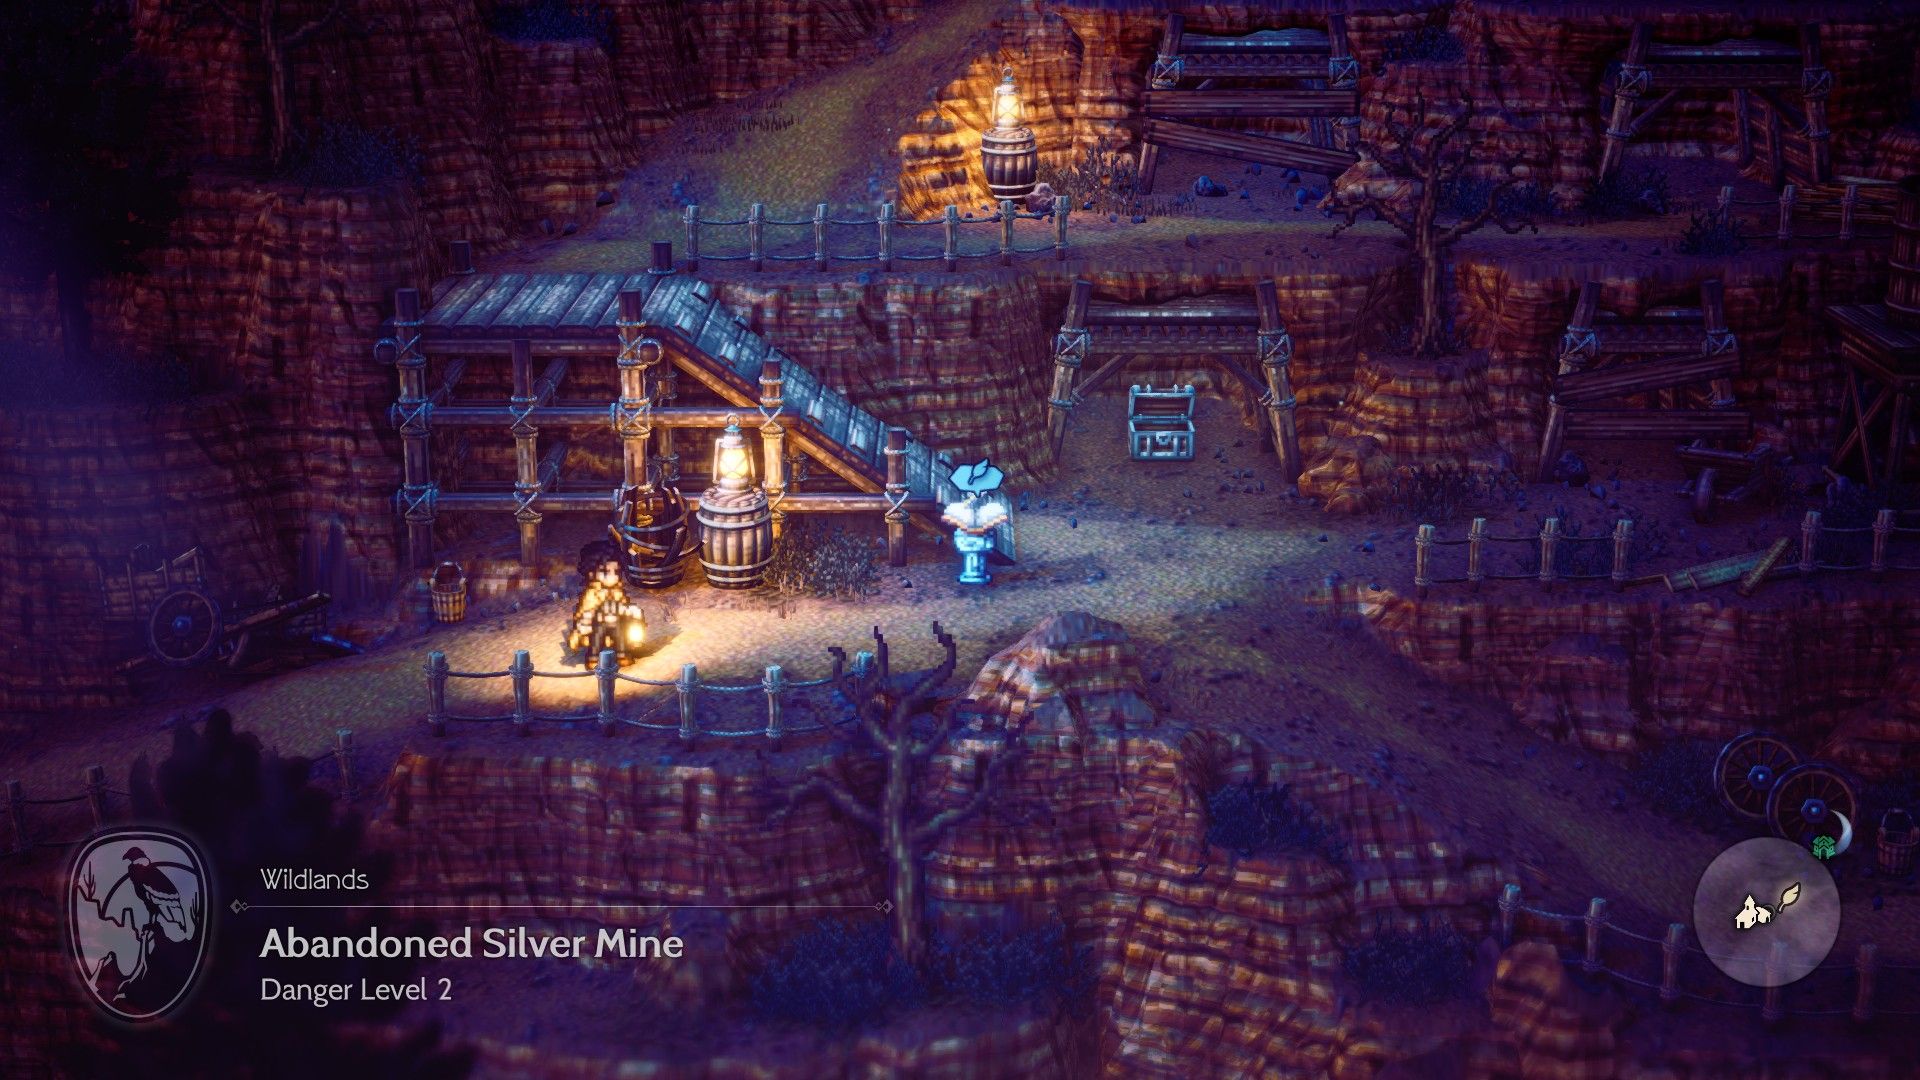 Octopath Traveler 2 Partitio Abandoned Silver Mine